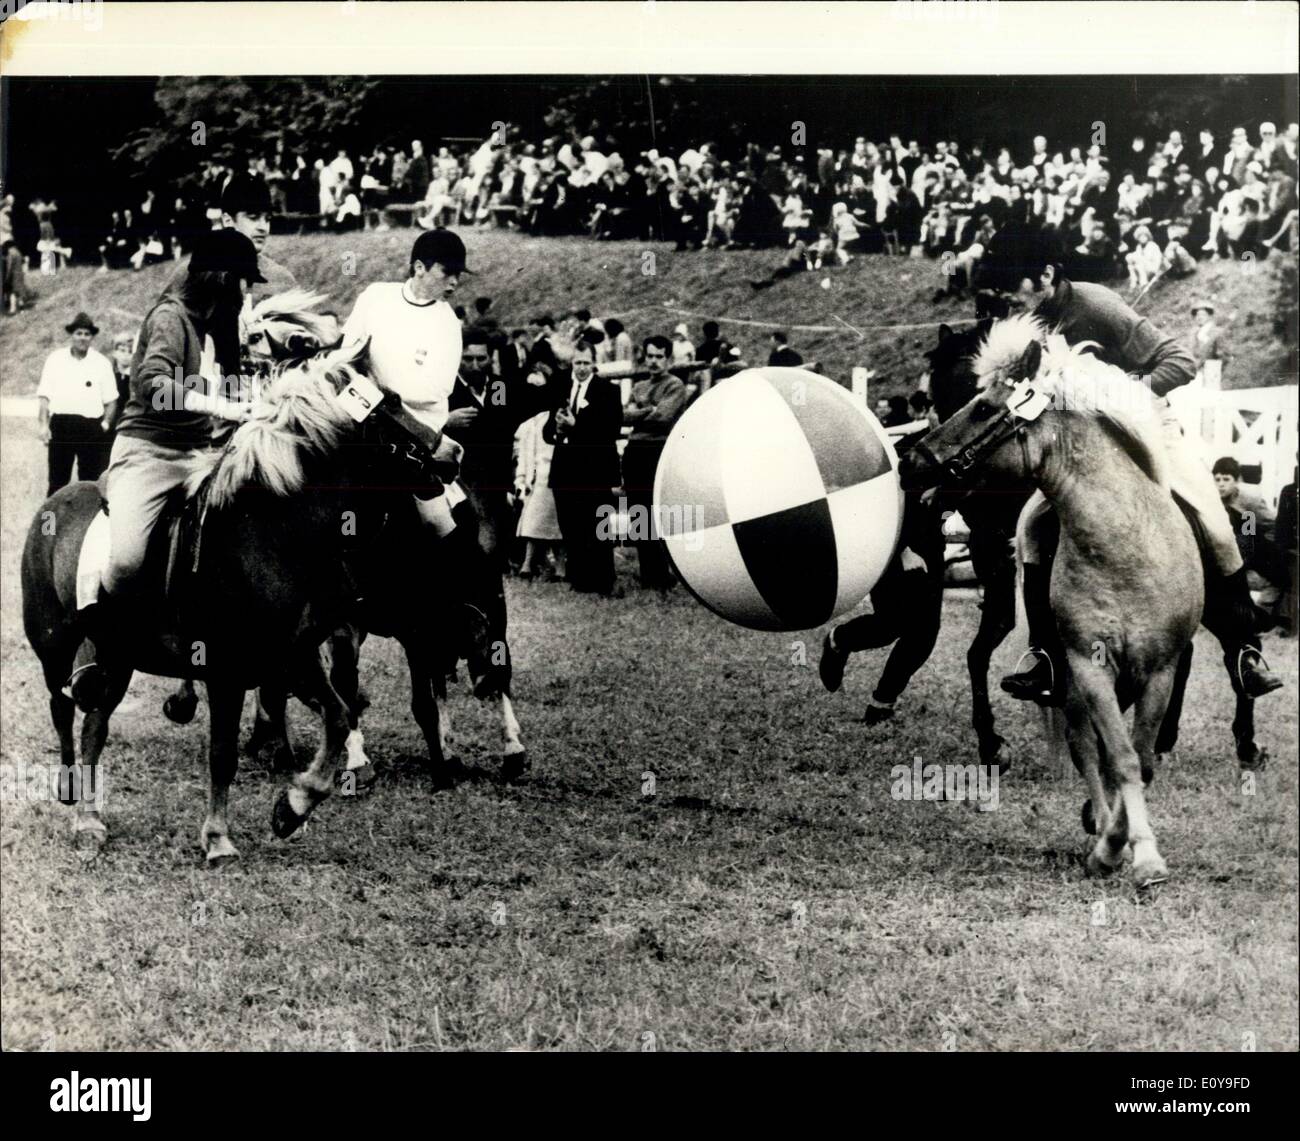 Jun. 06, 1969 - International Hoofball Match - A Perfect head-pass by a Swiss pony to a colleague, during the international hoofball match between Switerland and Holland, which ended in a 3-3 draw. In this game, six ponies and riders take part with a huge, light ball, and the main rule is that the riders do not touch the ball with their feet - and that only the ponies head or legs are used to send the ball goalwards. The Match took place in the german Dangenstett Stock Photo